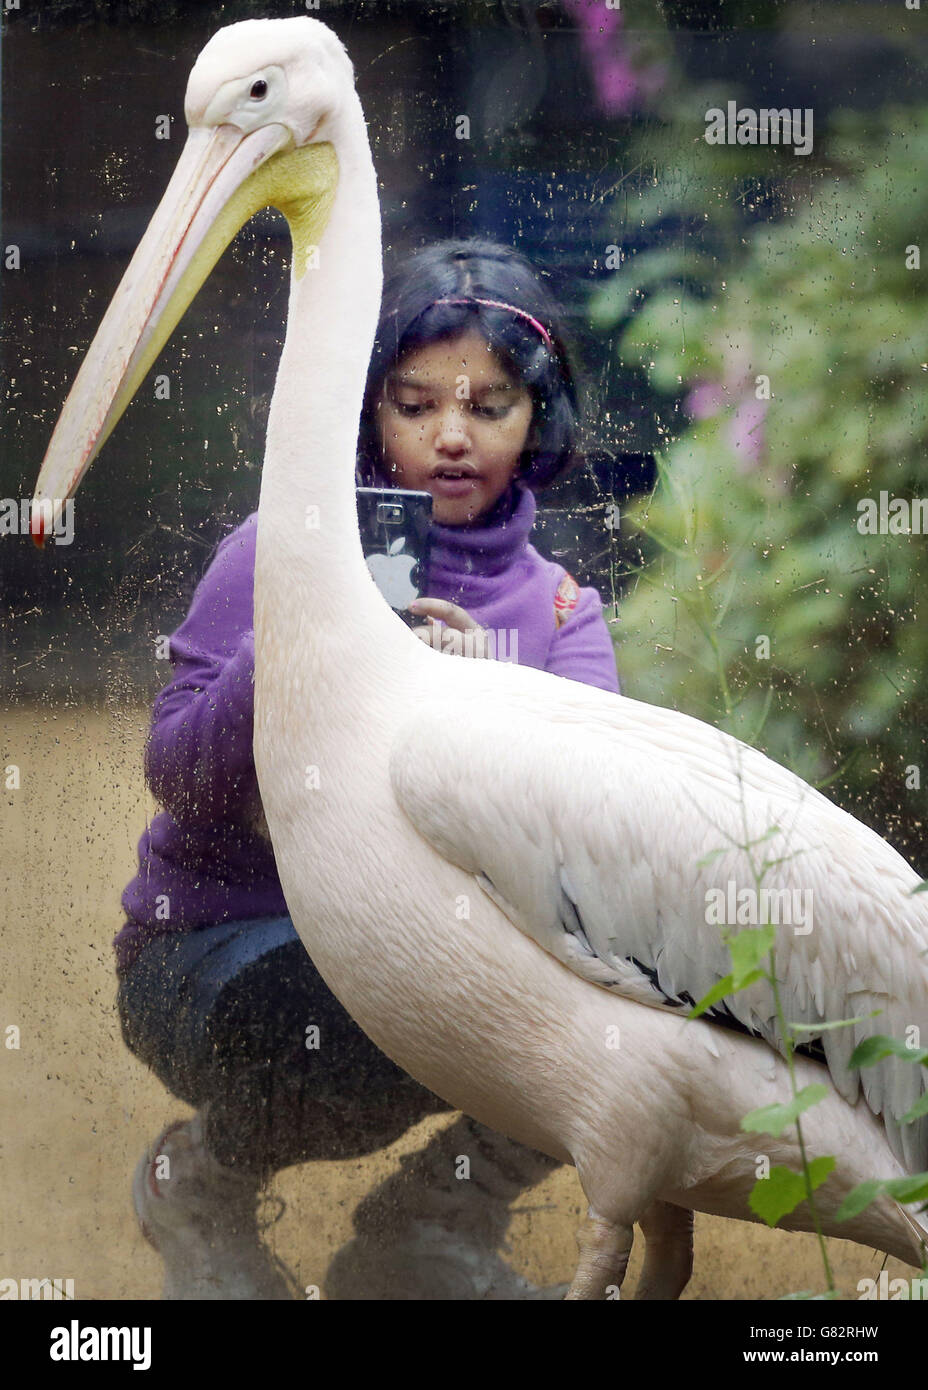 A visitor looks a pelican in the new Pelican Walkthrough exhibit at Edinburgh Zoo in Scotland. Stock Photo